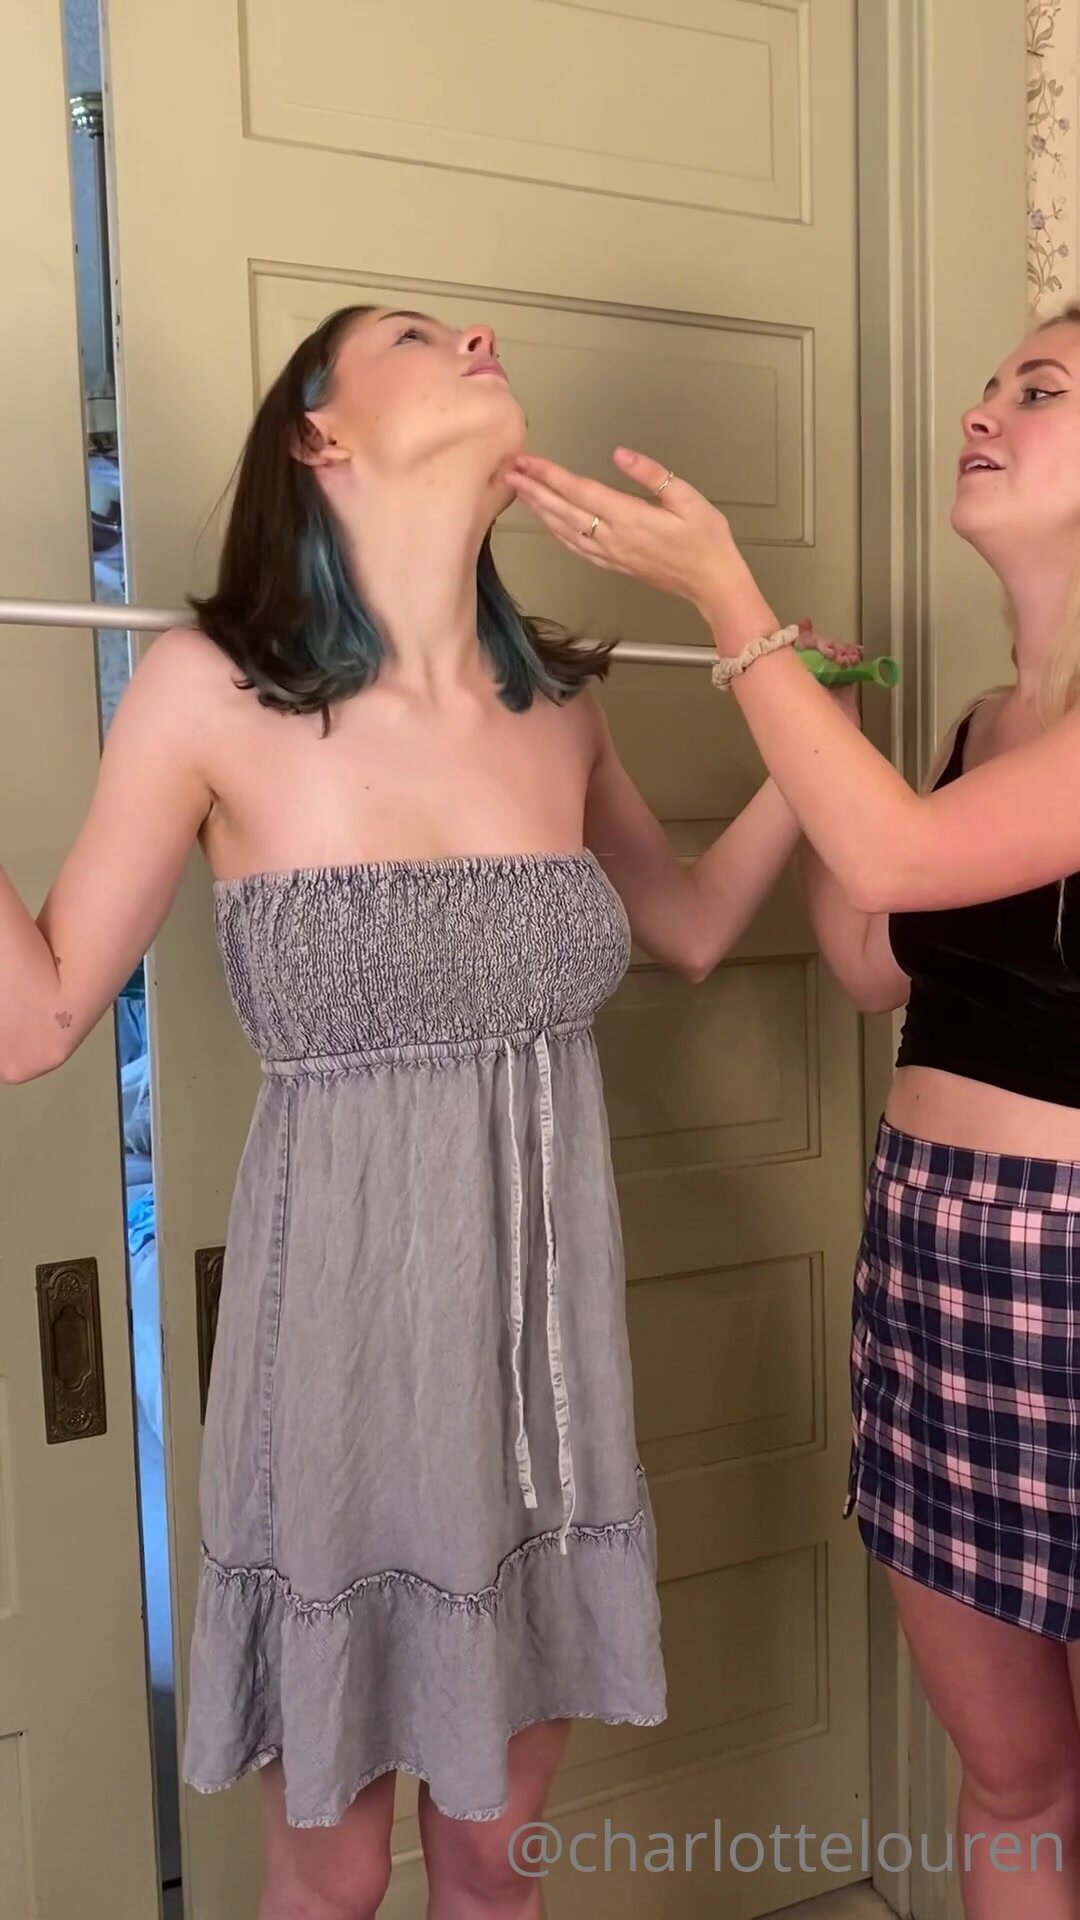 Strapless dress pulled down